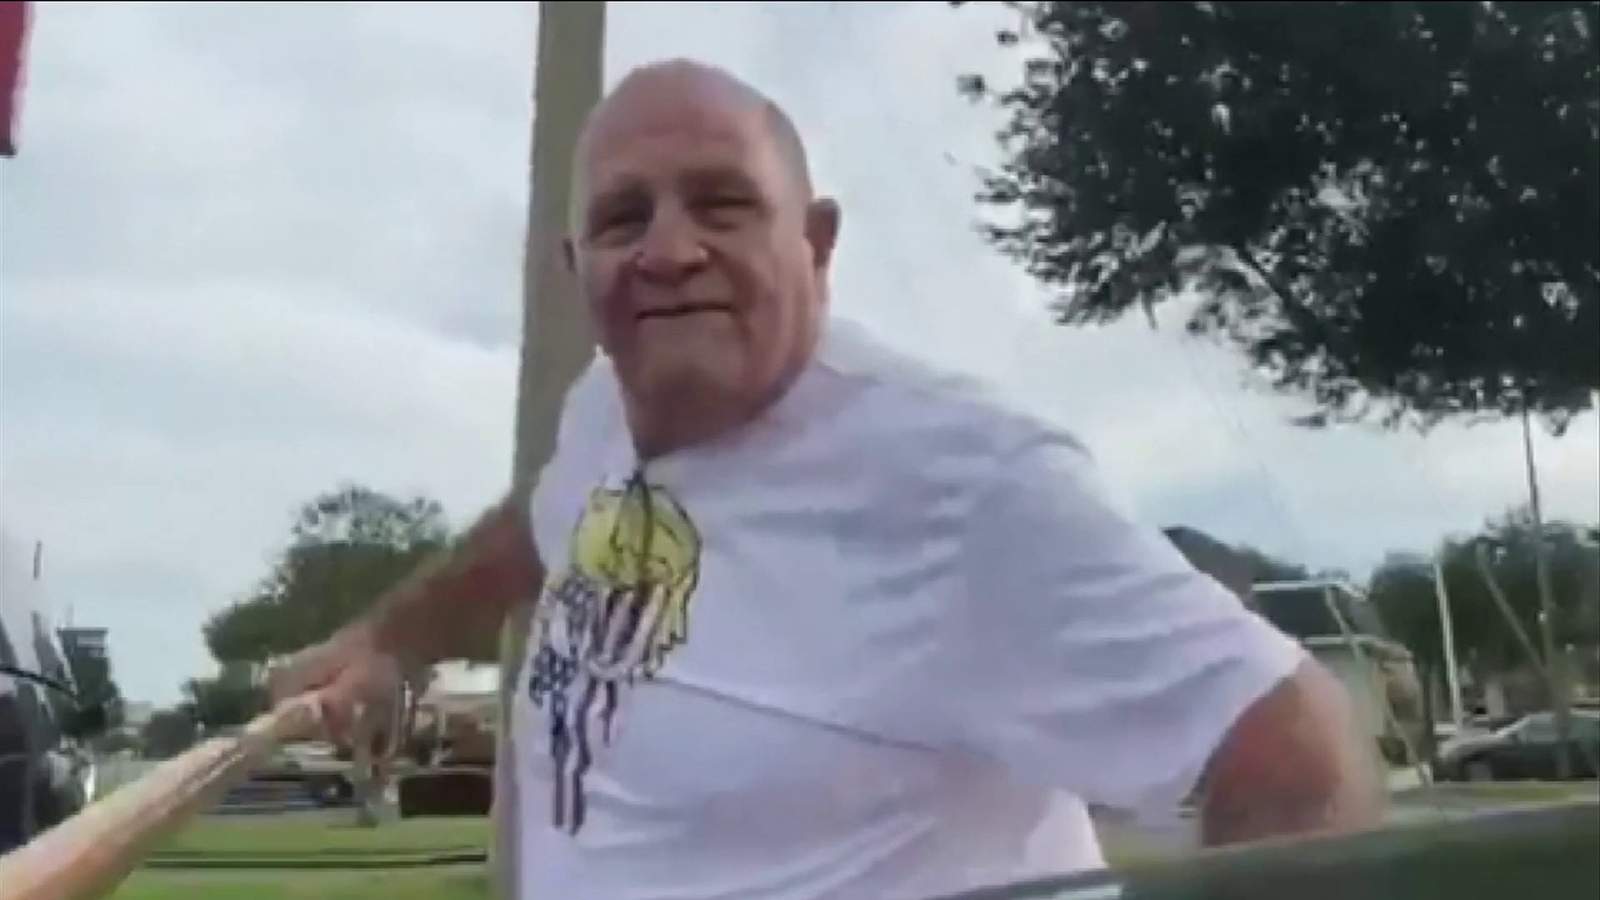 Florida man arrested after girl hit with flagpole during street corner pro-Trump rally